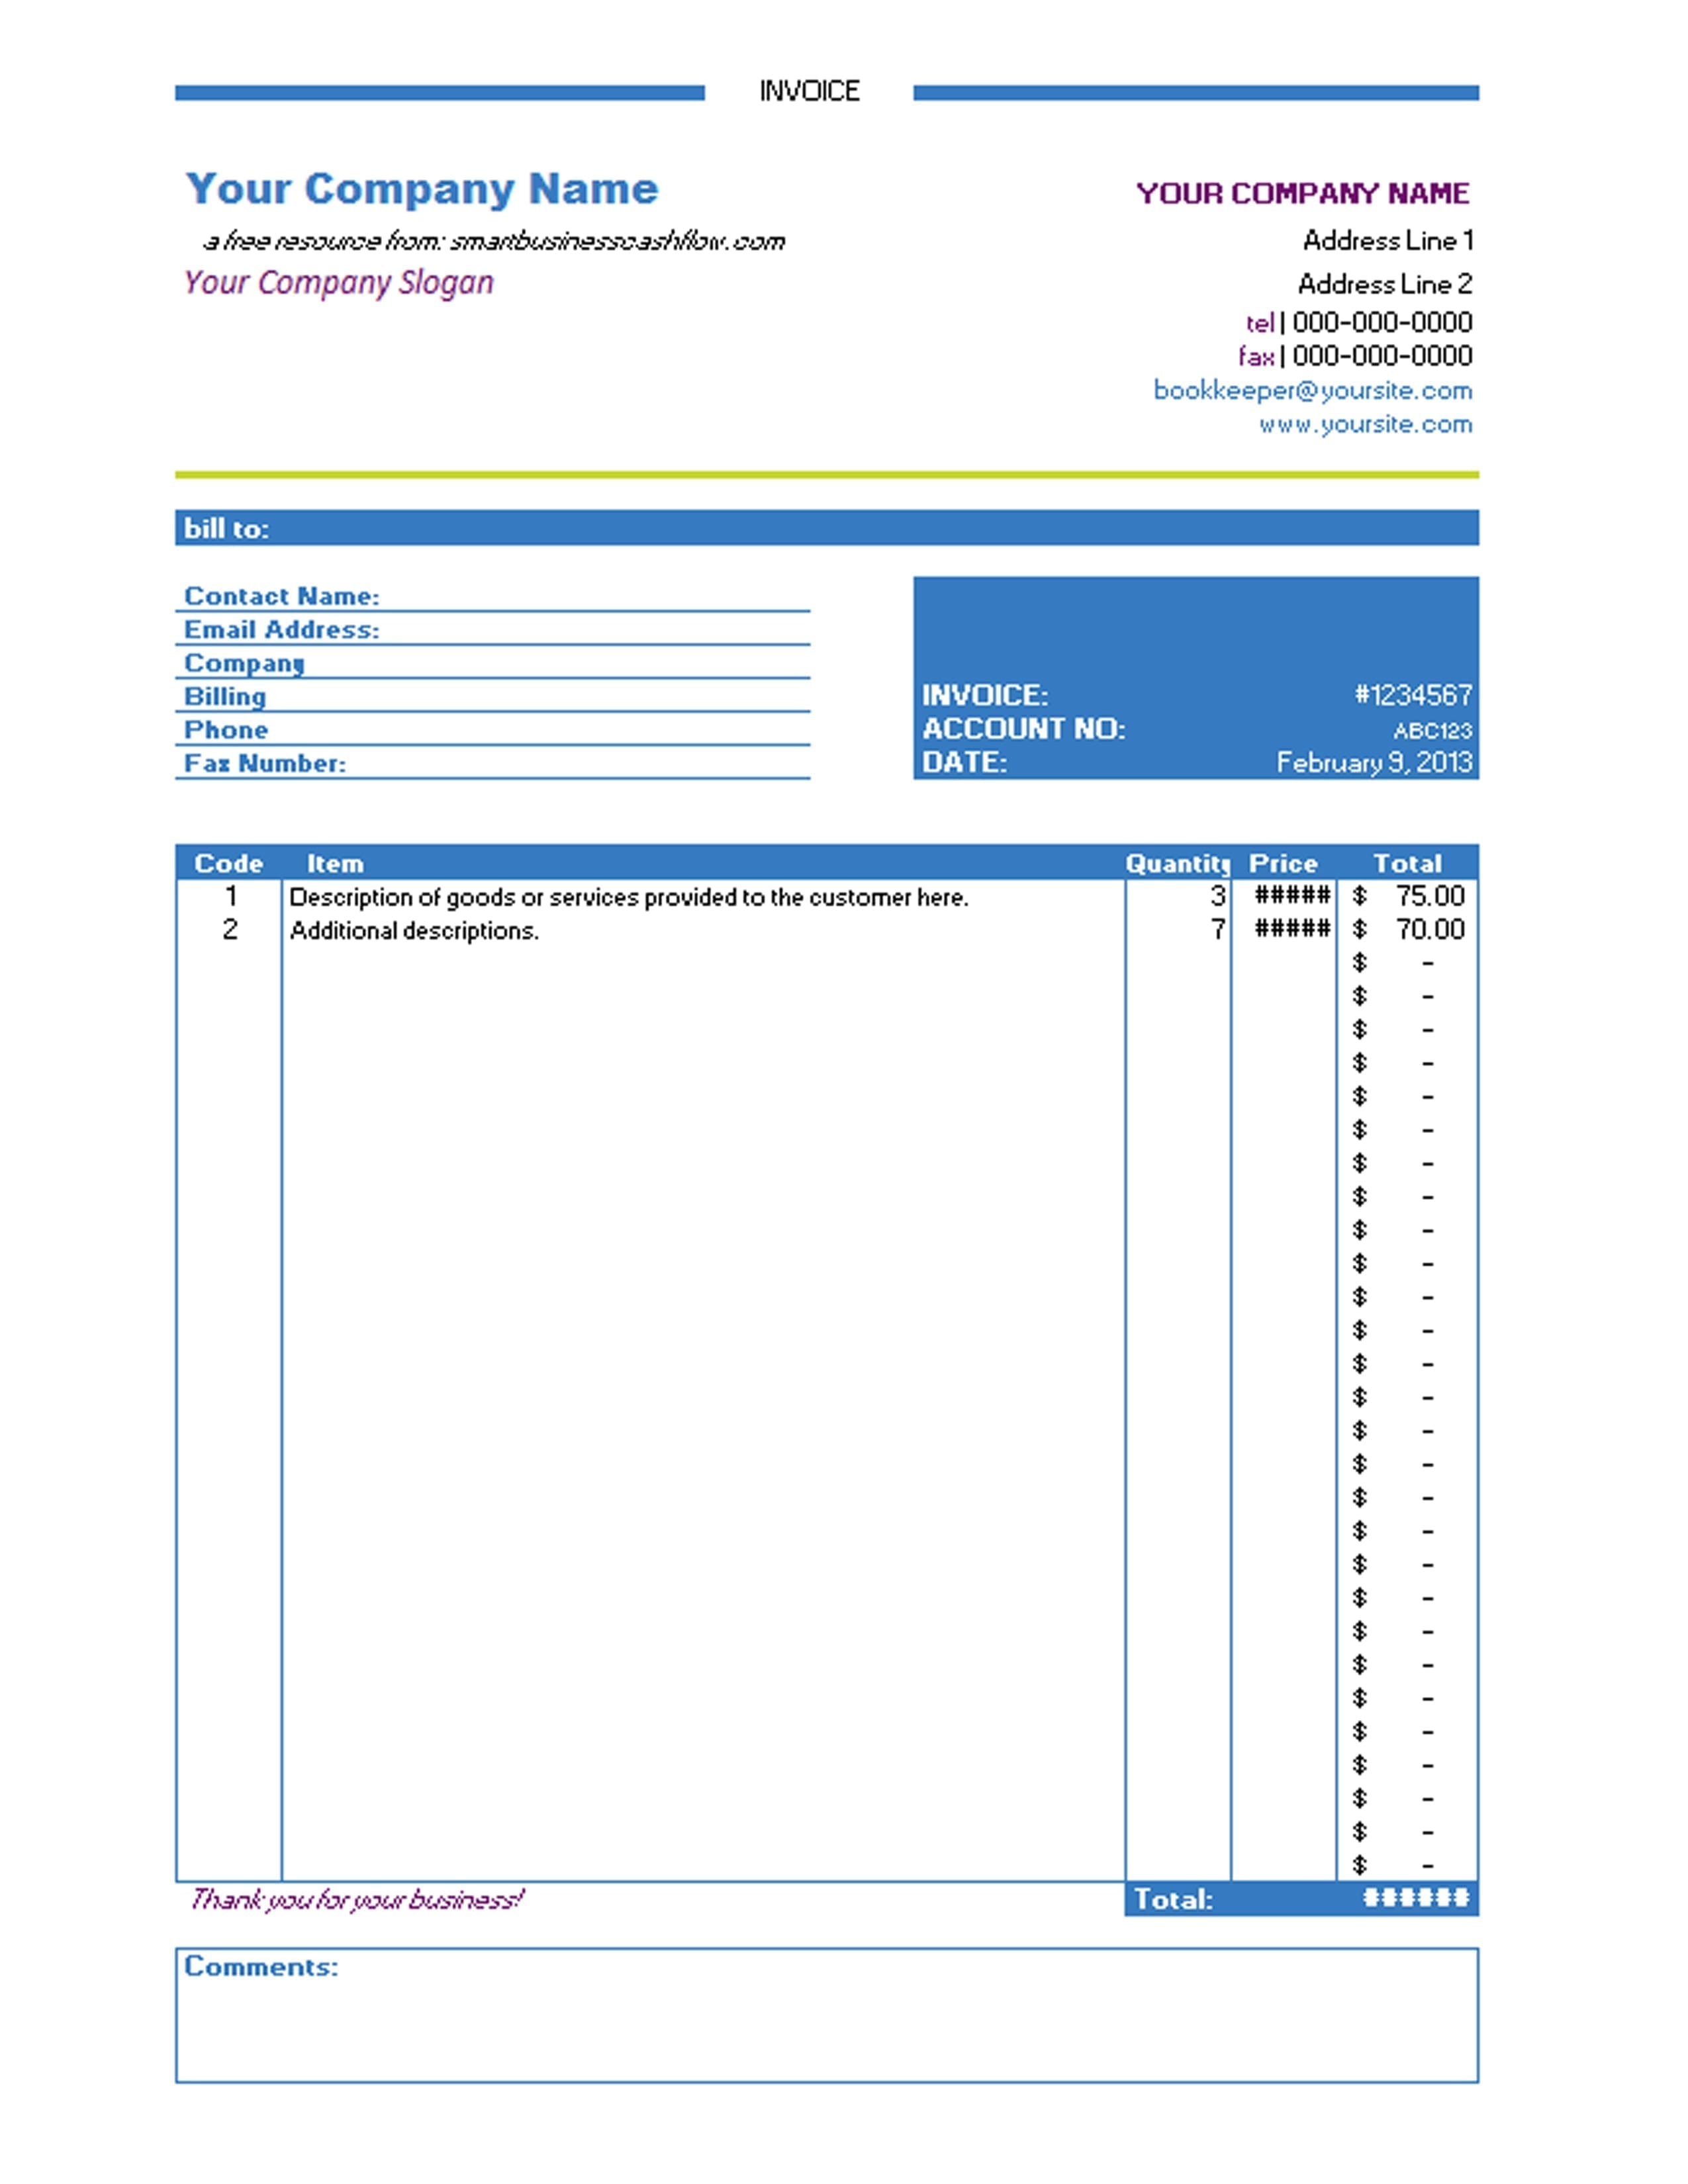 invoice template download